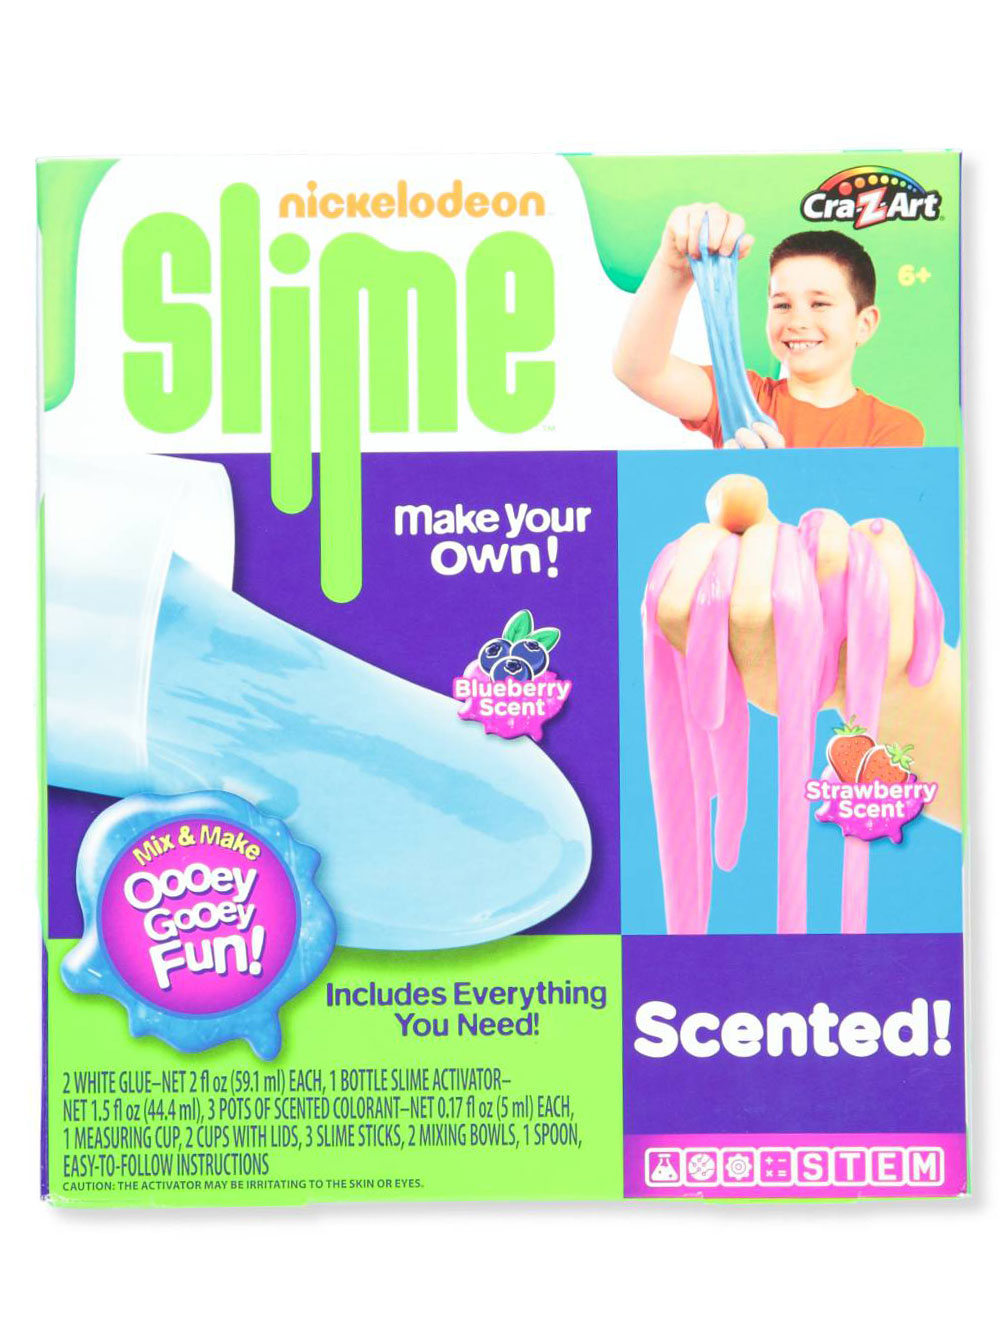 Cra Z Art Nickelodeon Scented Slime Making Kit Colors As